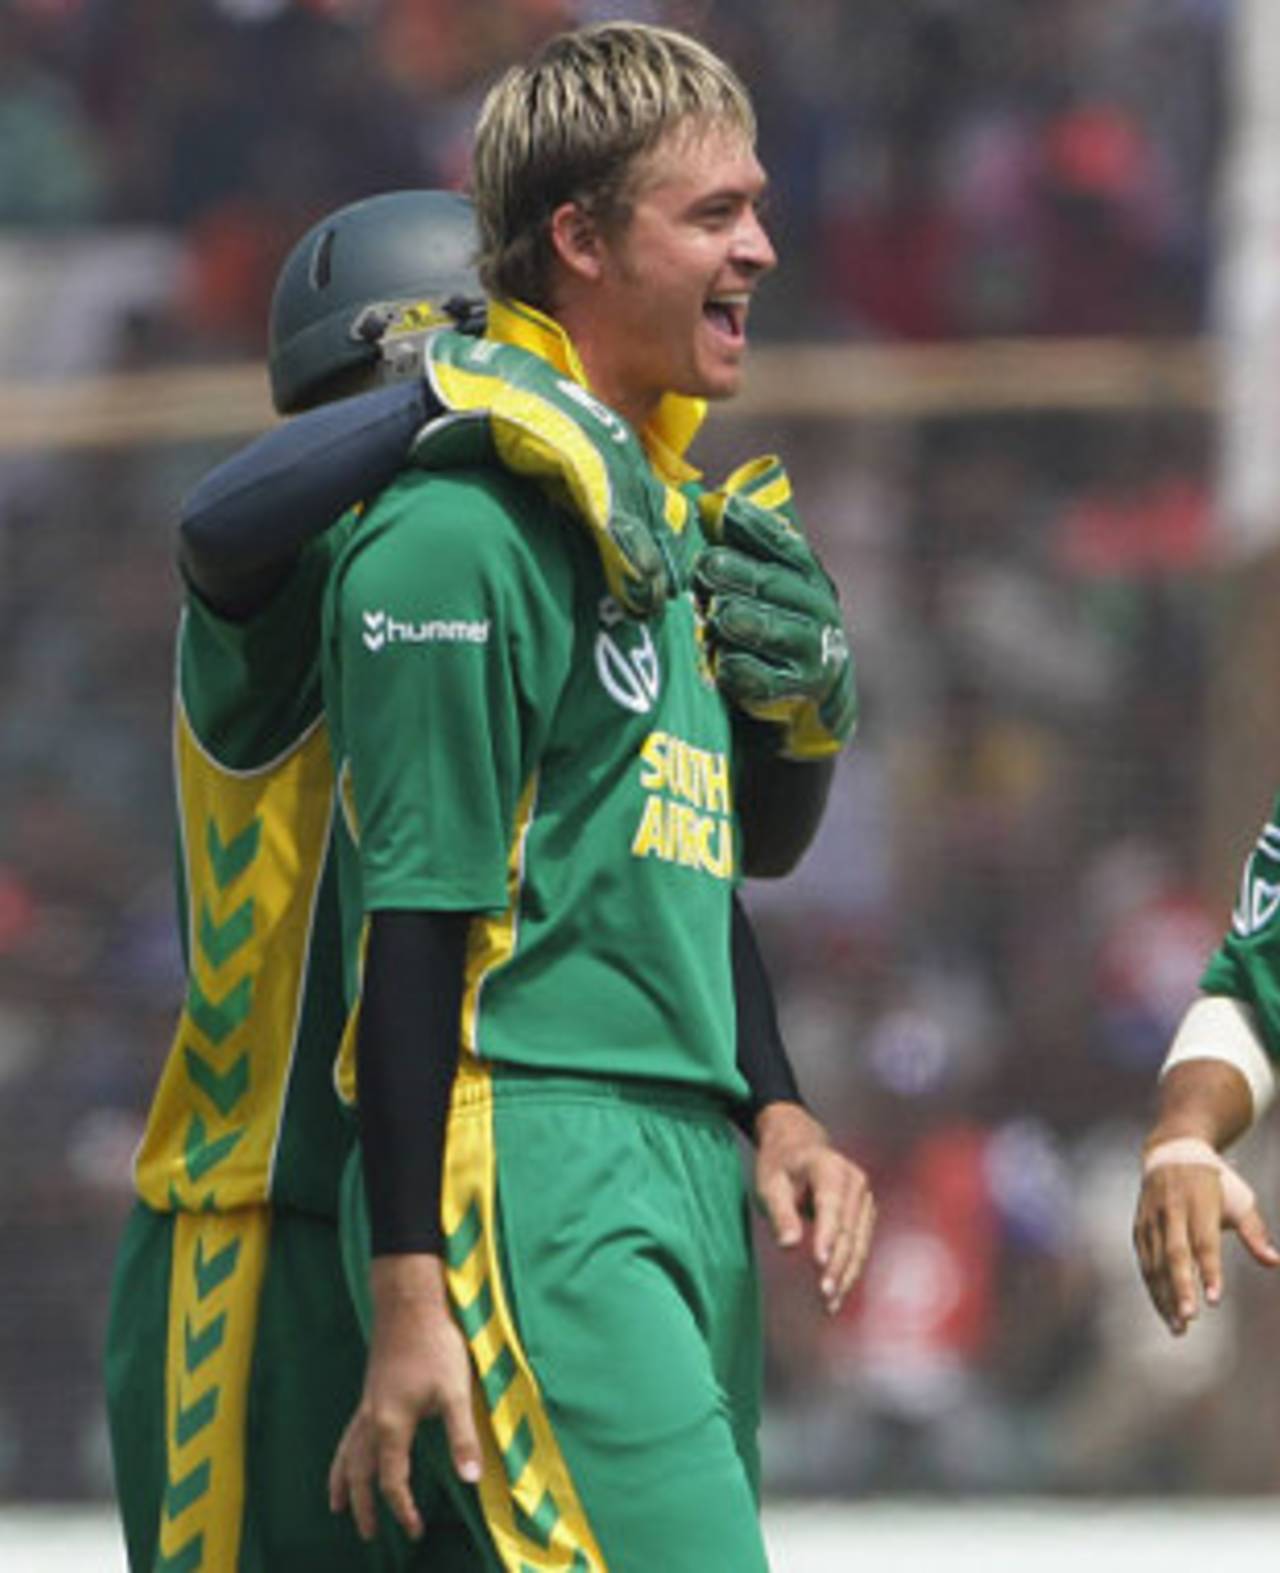 Paul Harris is delighted after dismissing Tamim Iqbal for 82, Bangladesh v South Africa, 1st ODI, Chittagong, March 9, 2008